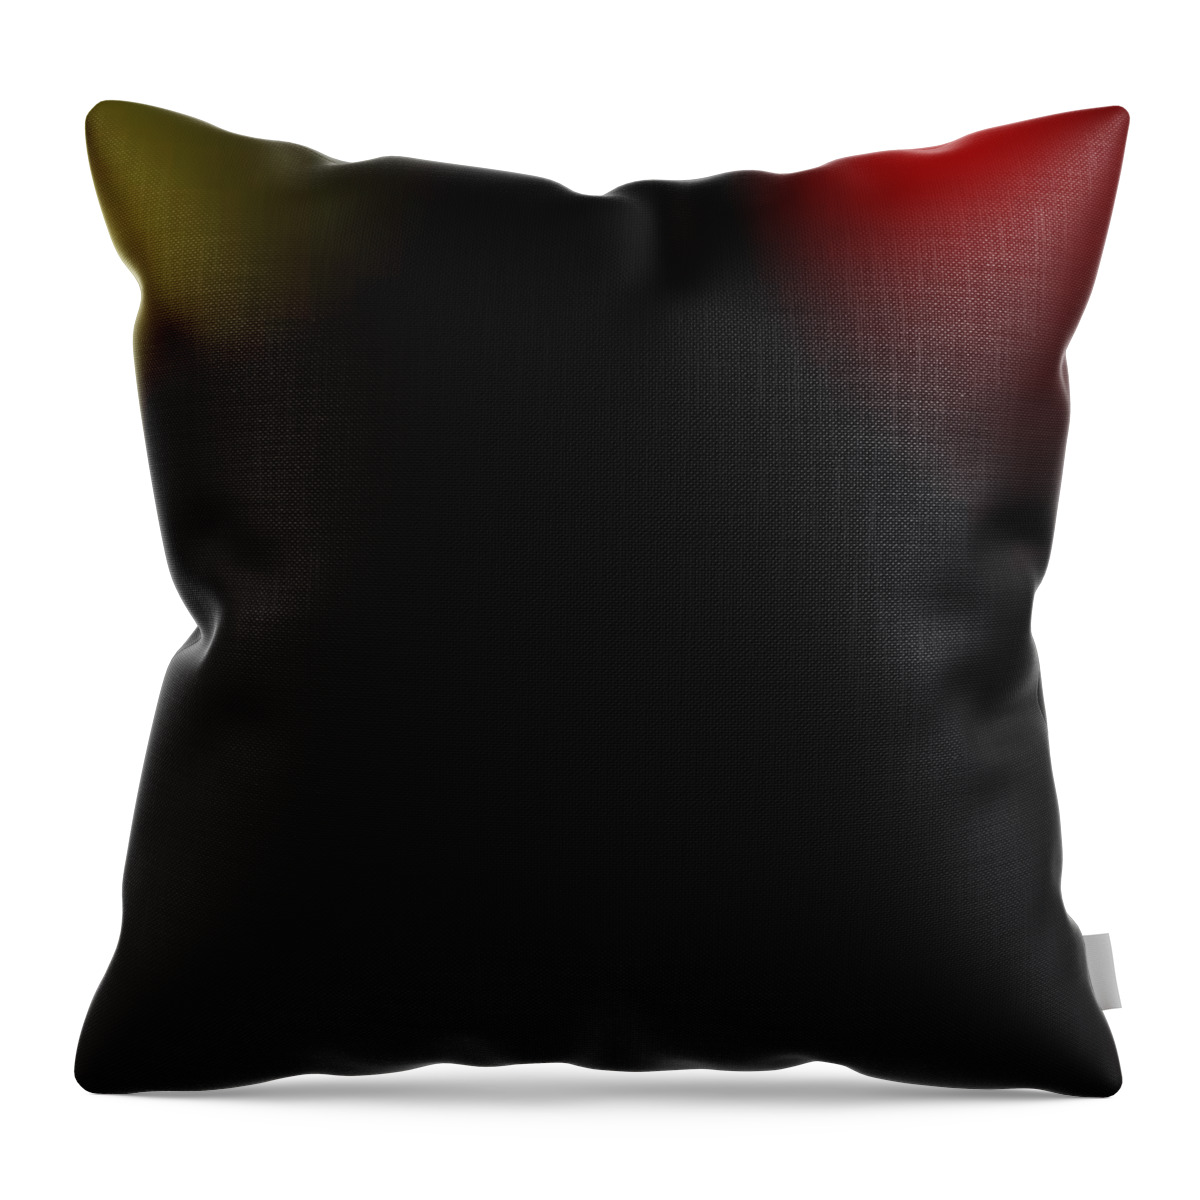 Abstract Throw Pillow featuring the digital art All Of The Colors Of Light by Saad Hasnain